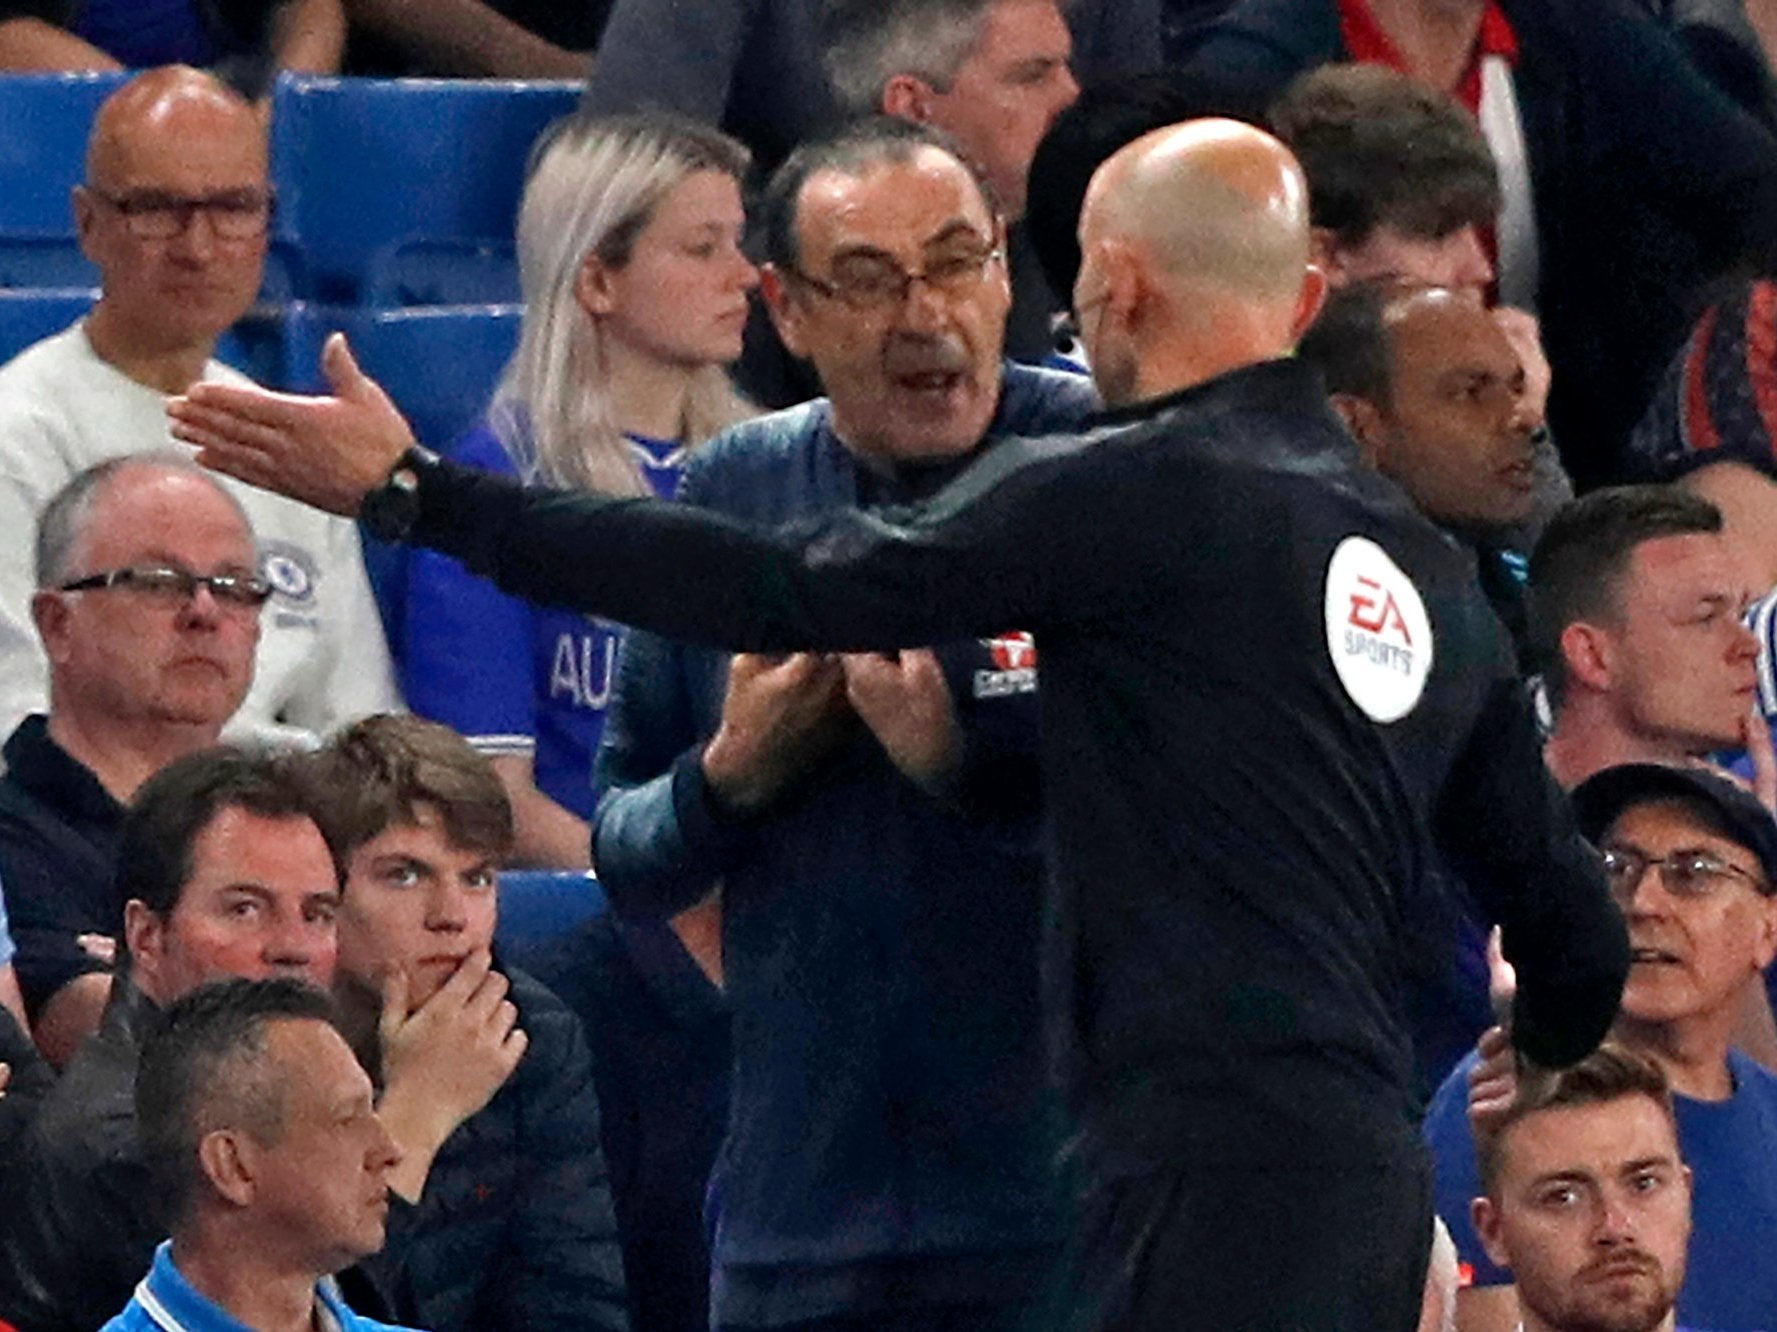 Maurizio Sarri was sent off during Chelsea's 2-2 draw with Burnley (AFP/Getty)